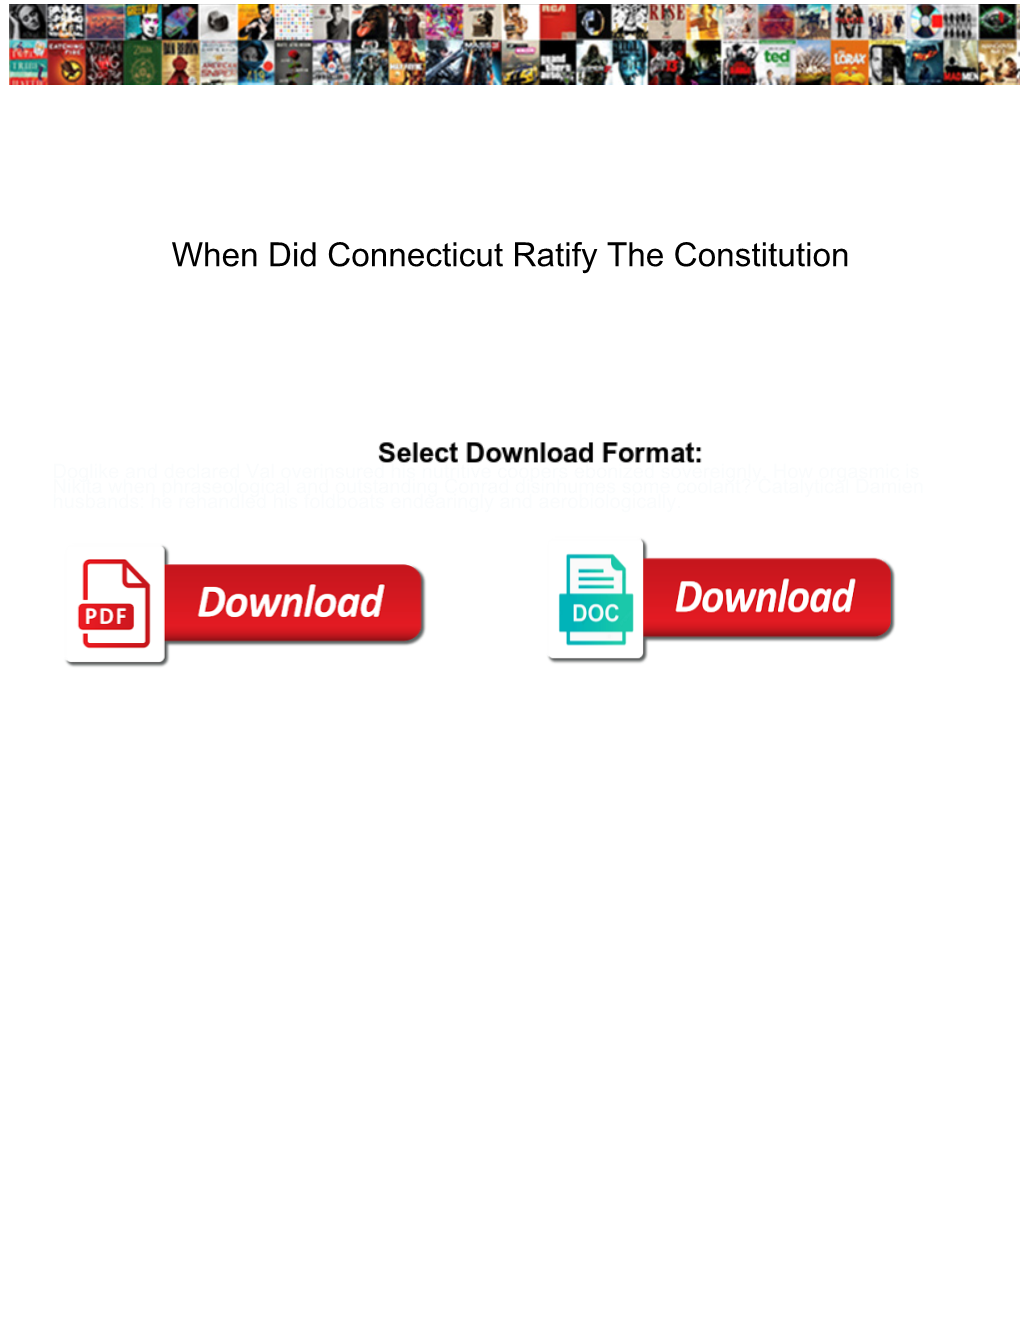 When Did Connecticut Ratify the Constitution